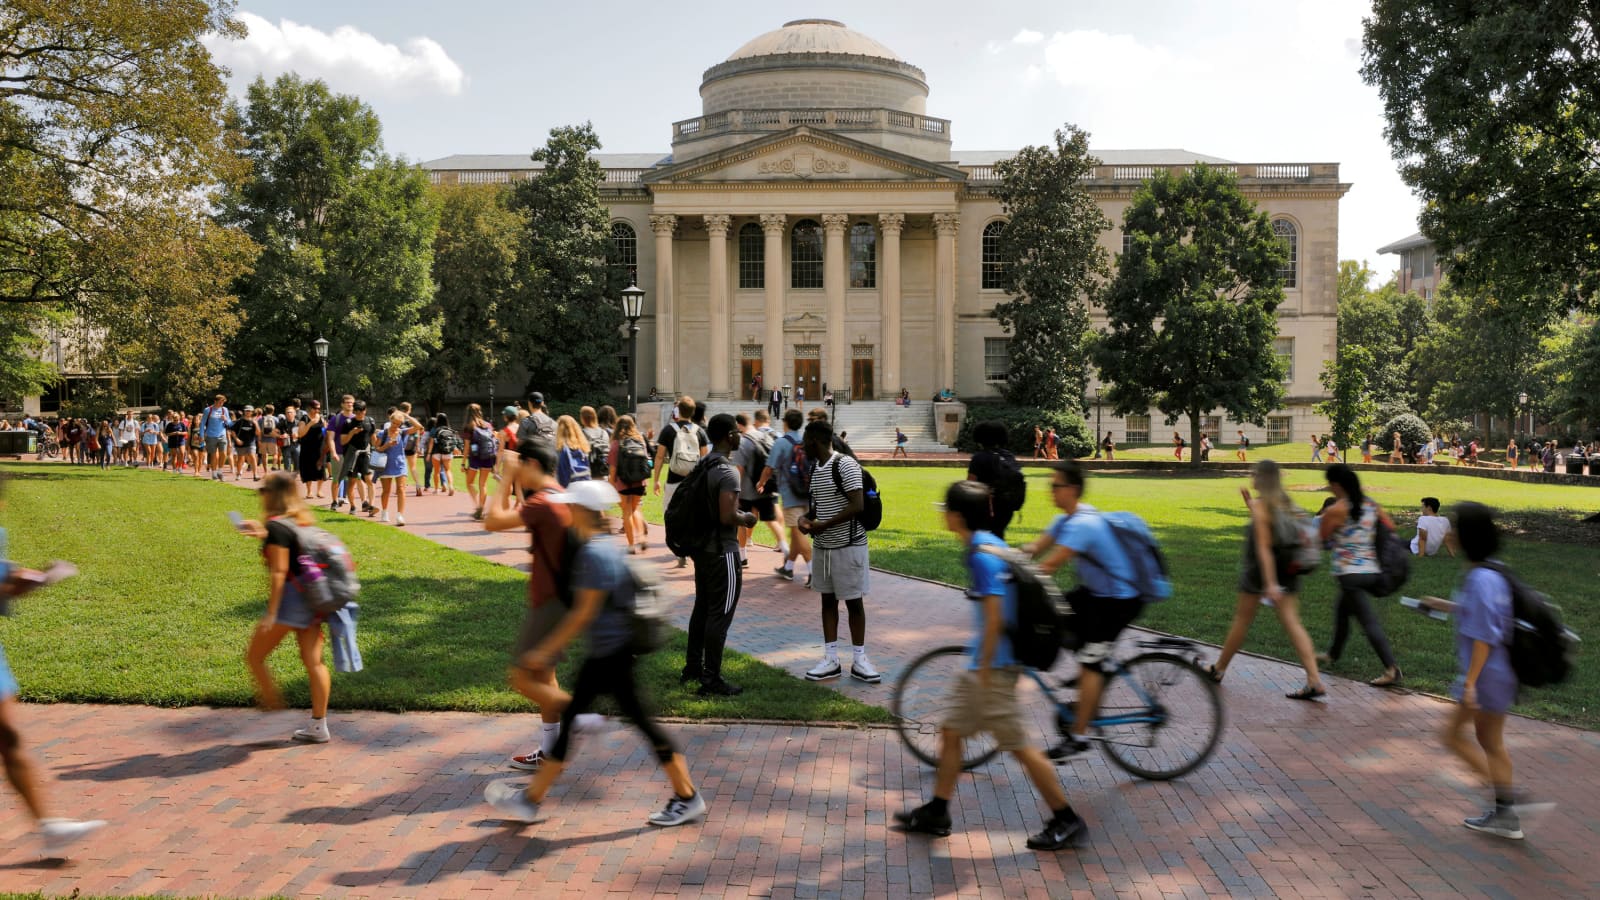 UNC abruptly halts in-person classes after coronavirus outbreak on campus